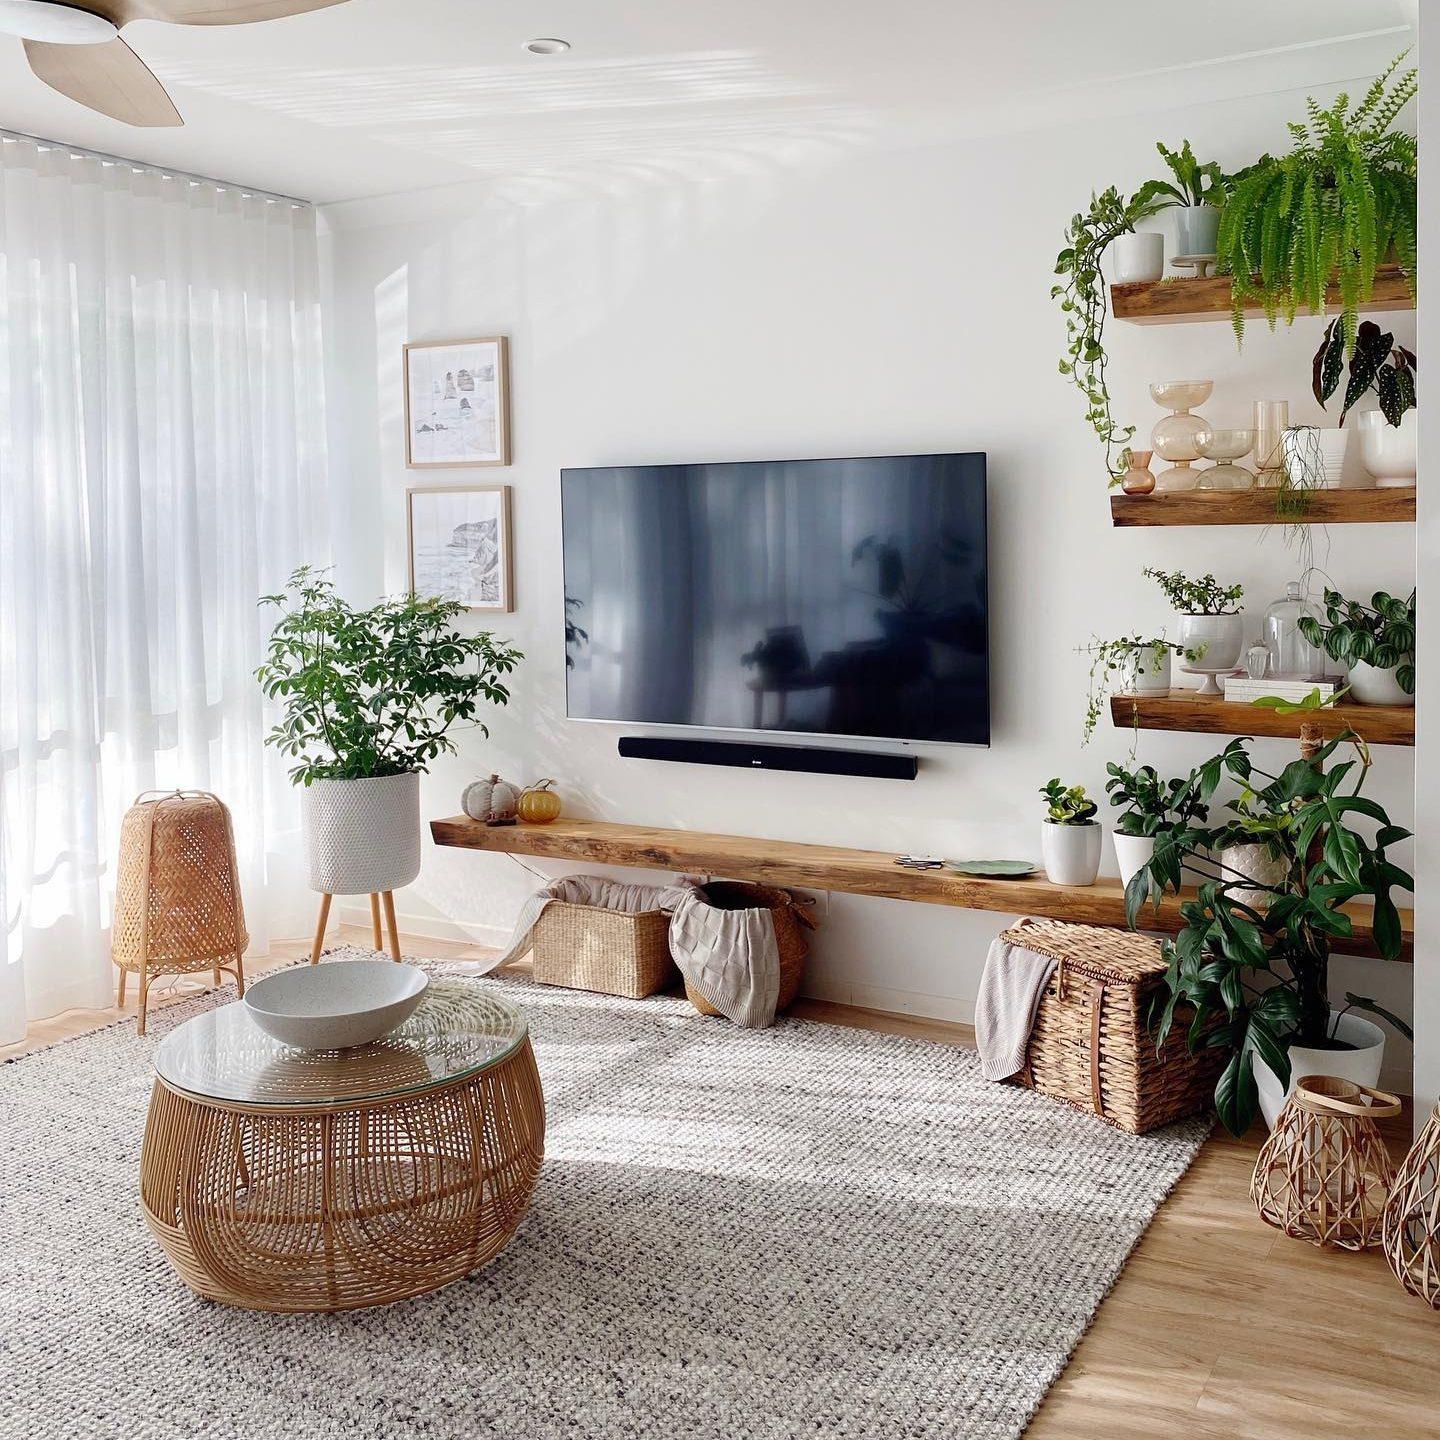 10 Ideas on How to Decorate a TV wall - Decoholic